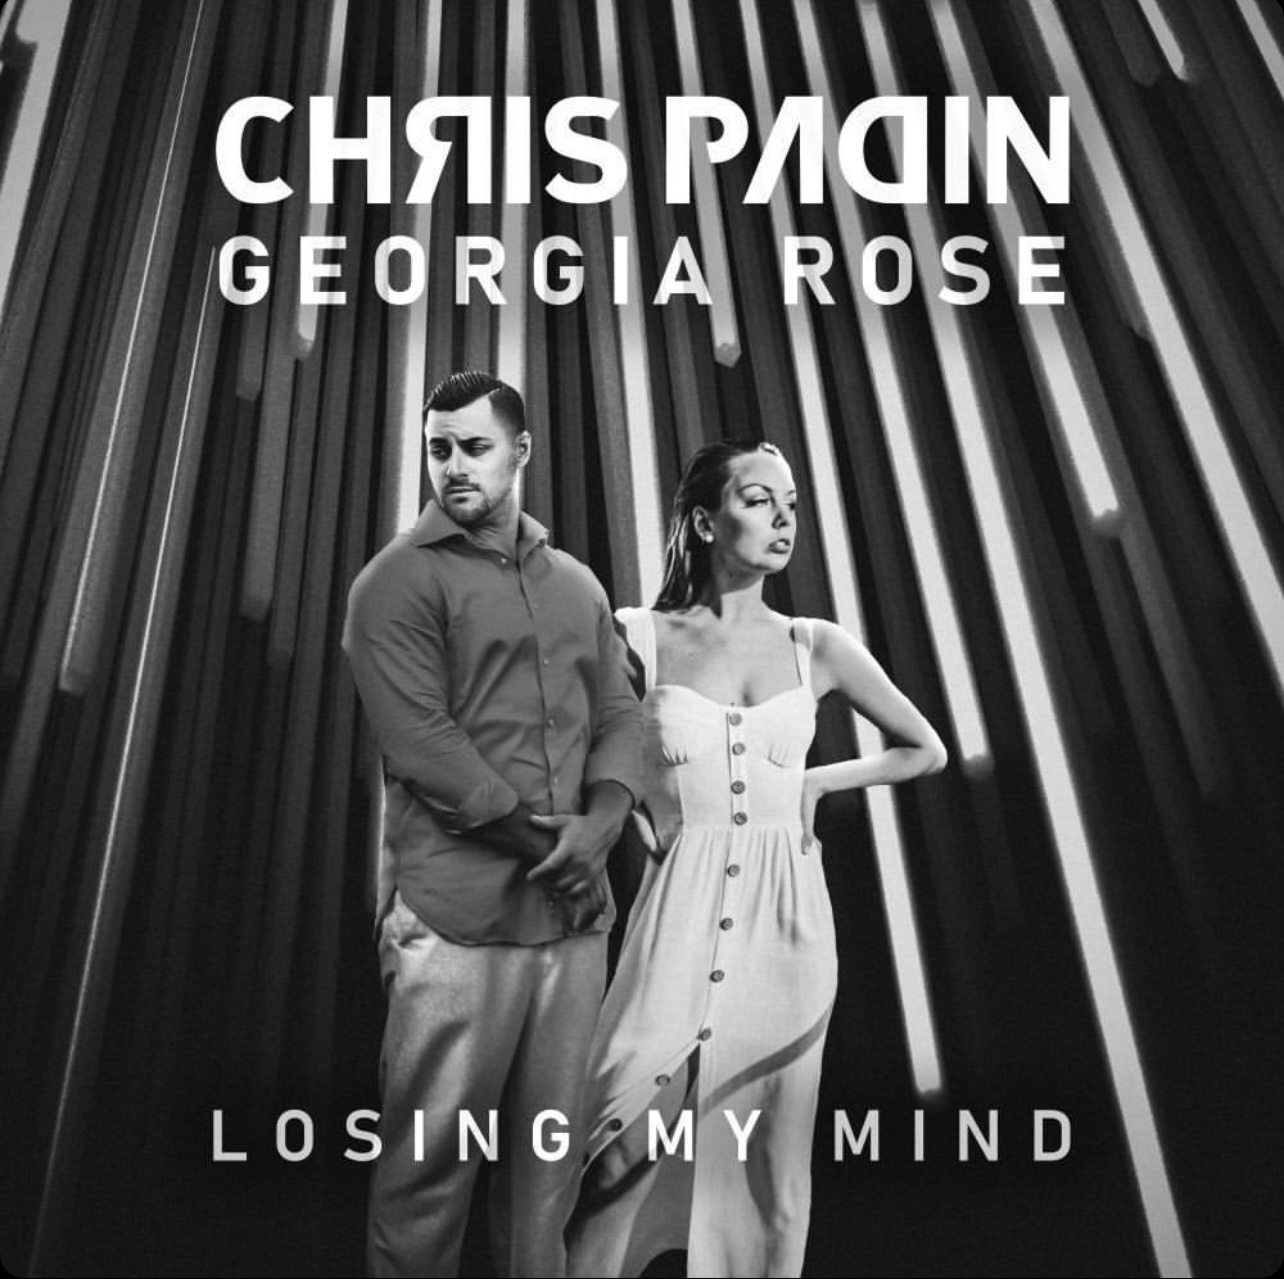 ‘Chris Padin’ wanted to let the amazing vocals of Georgia Rose take center stage on hot new single ‘Losing My Mind’